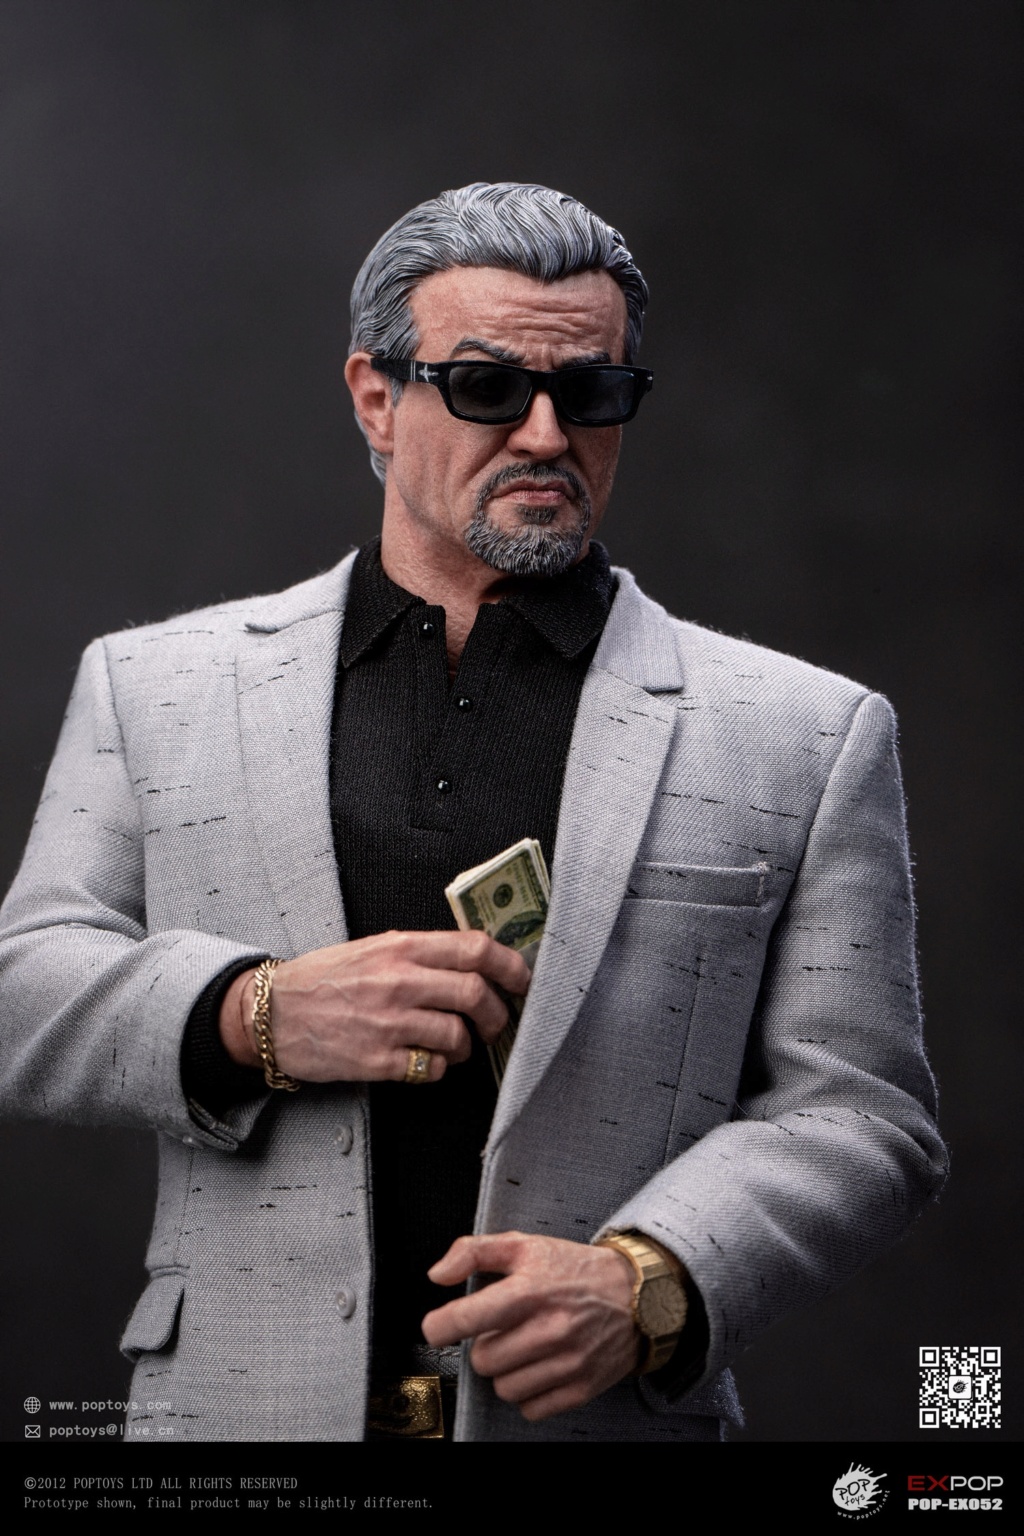 Cable-Based - NEW PRODUCT: POPTOYS: EX052 1/6 Scale The King of Gangs (Tulsa King) 19054110